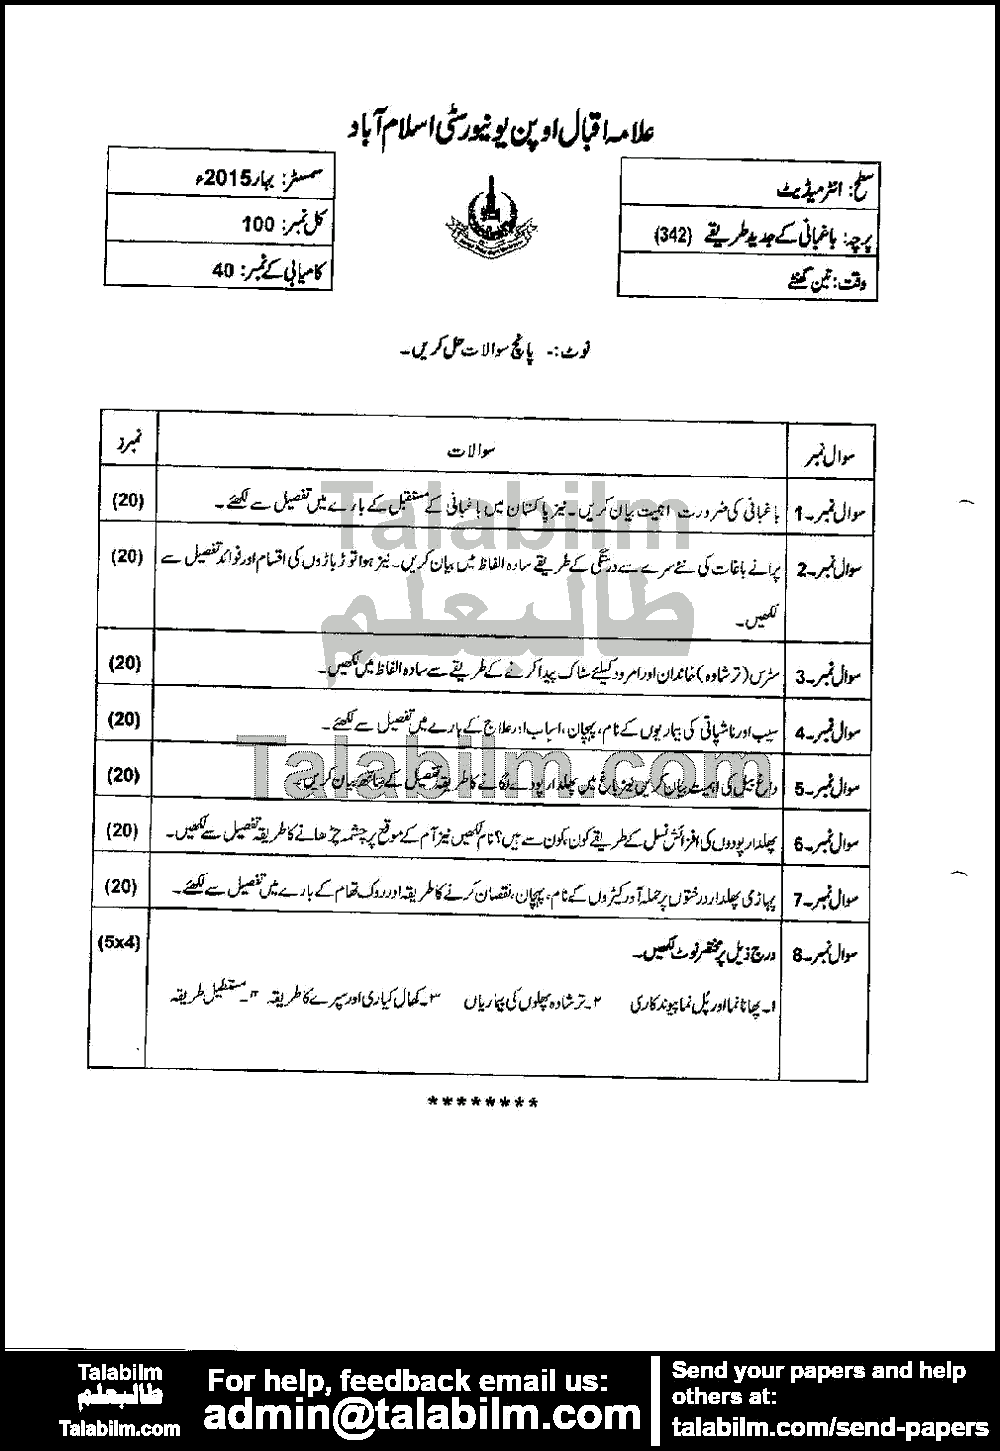 Baghbani Ky Amli Tareeqy 342 past paper for Spring 2015